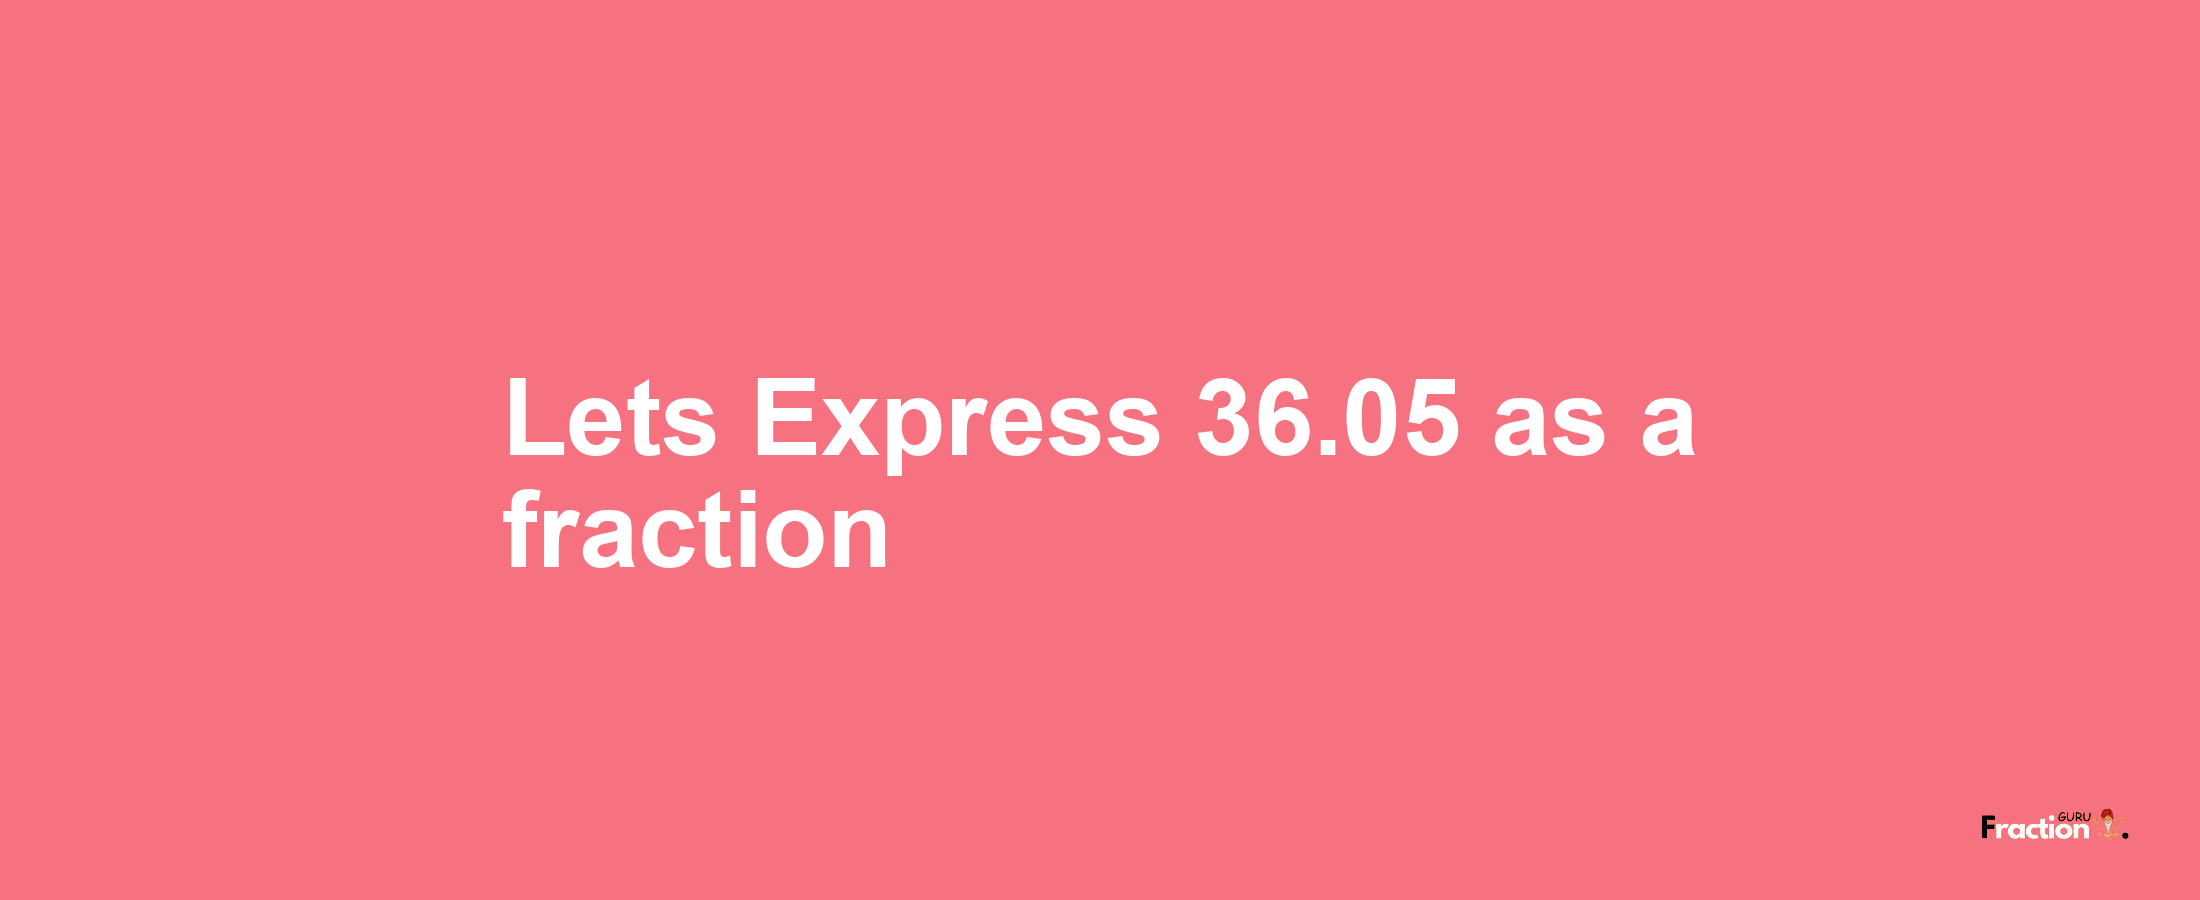 Lets Express 36.05 as afraction